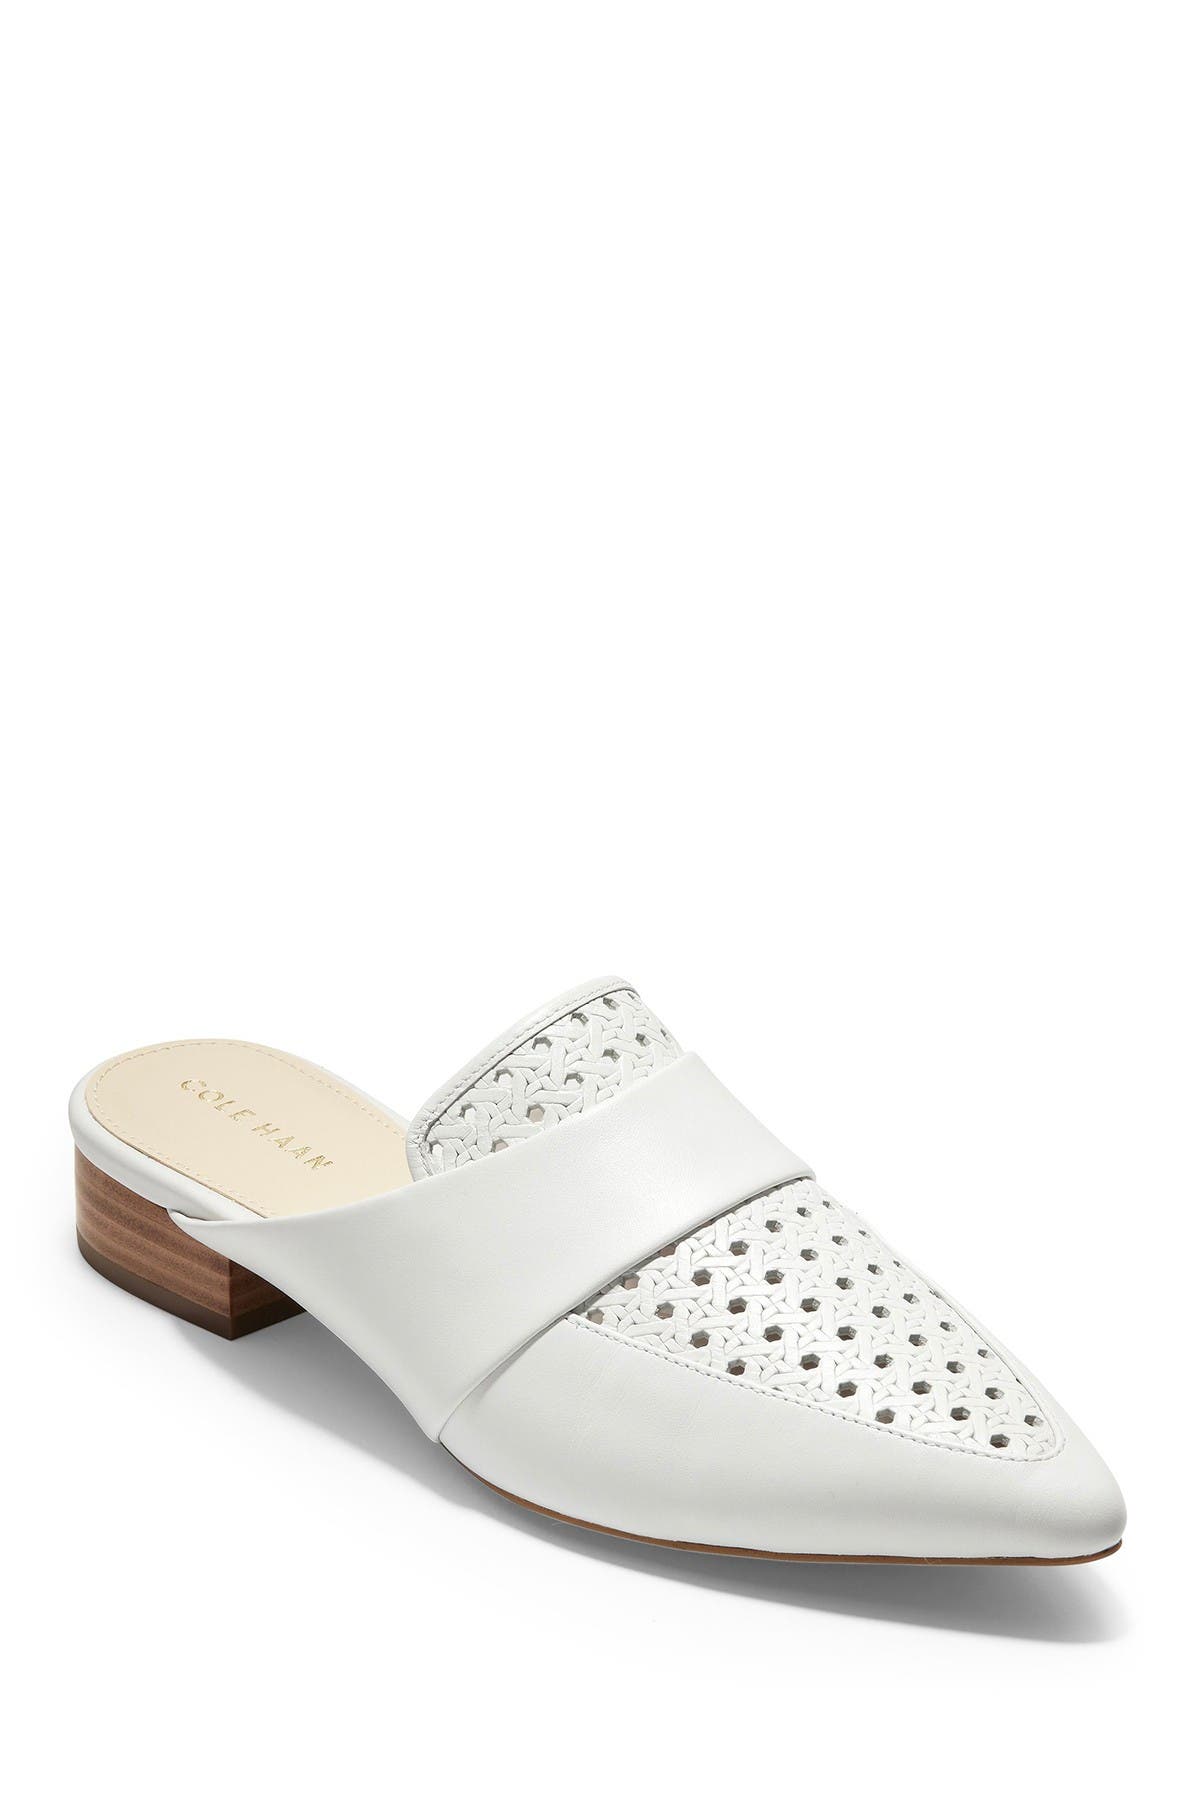 cole haan white mules